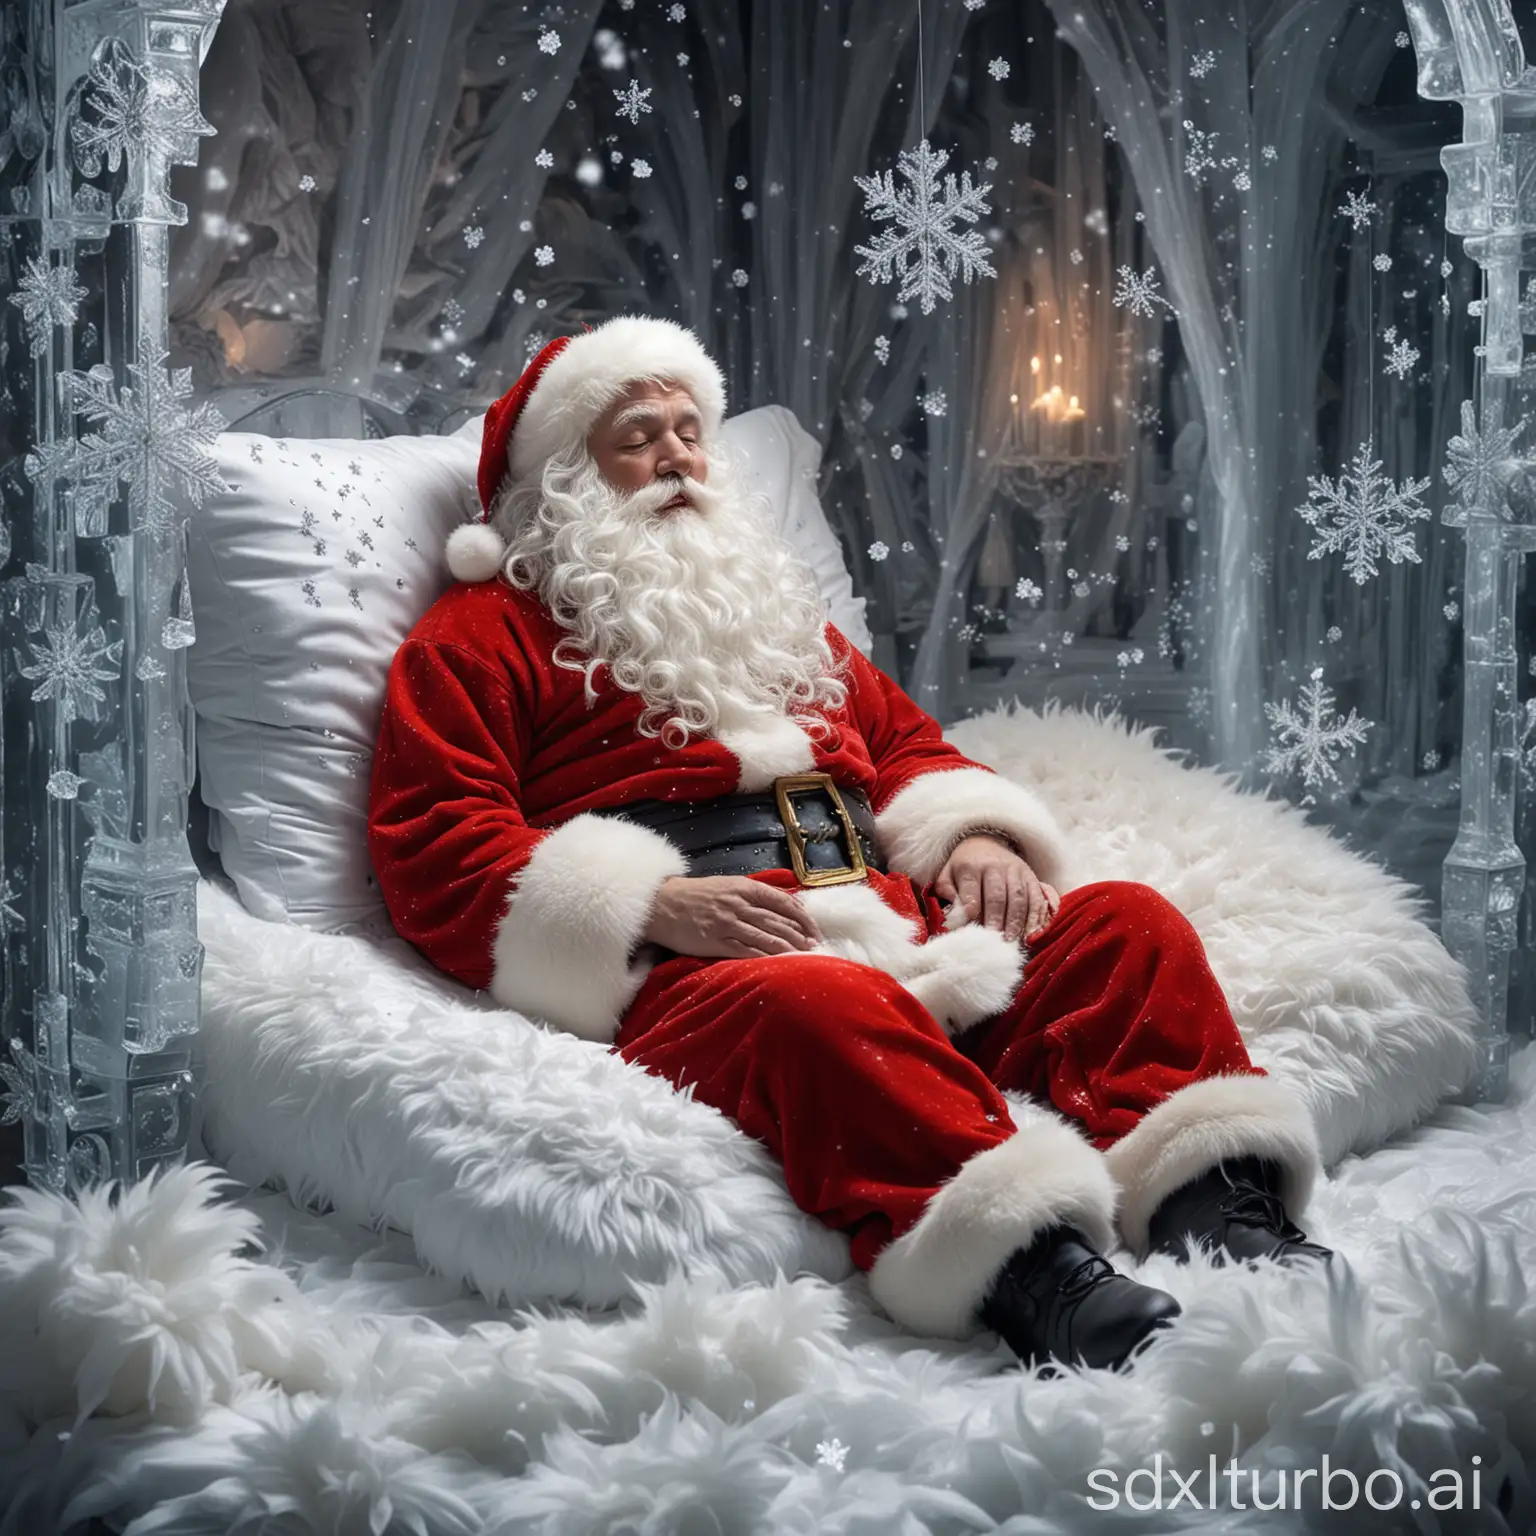 Santa-Claus-Sleeping-in-Magnificent-Ice-Palace-Surrounded-by-Glittering-Snowflakes-and-Fluffy-Fur